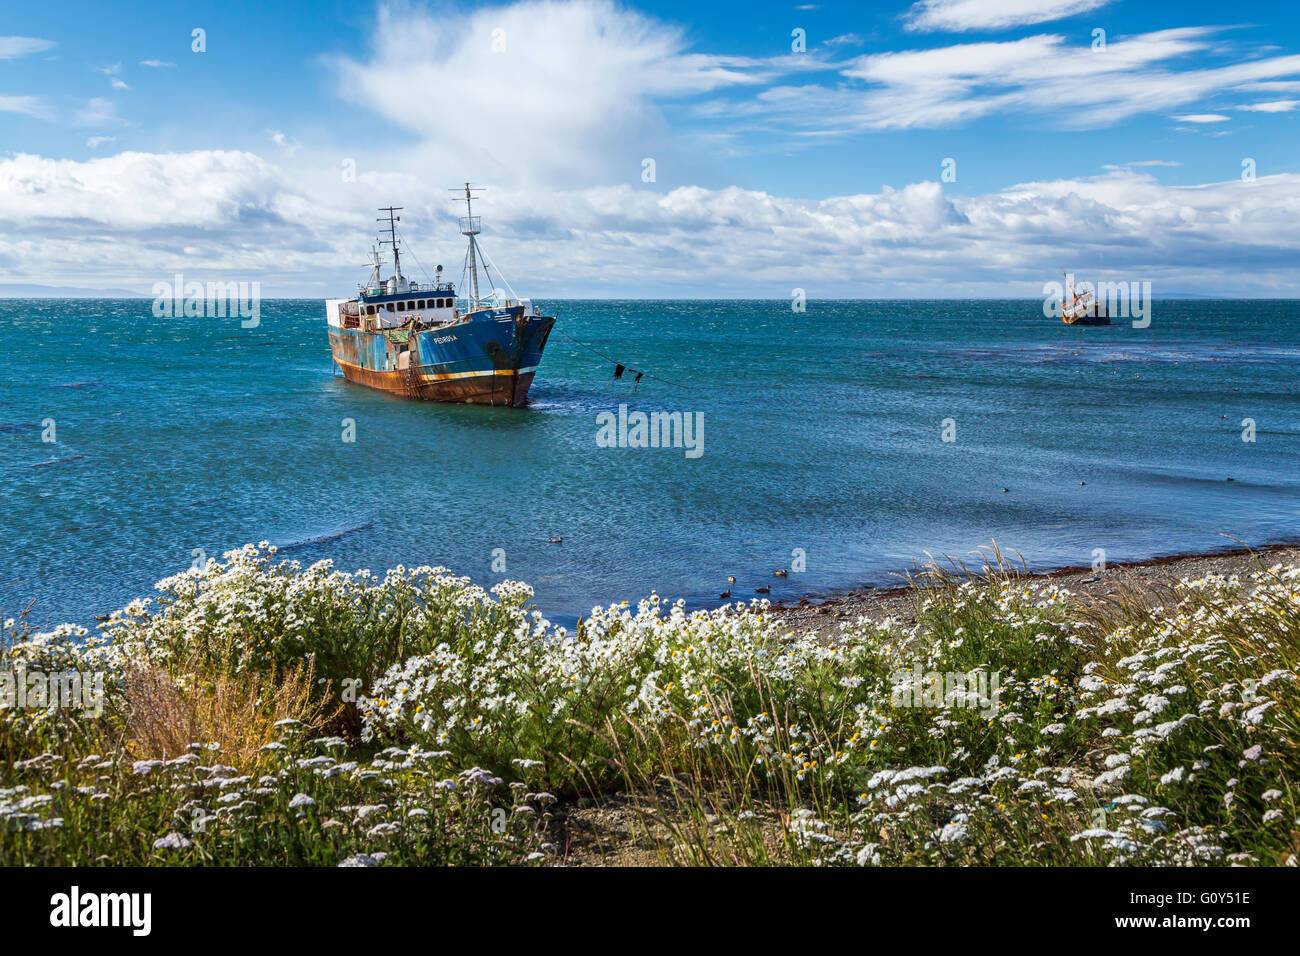 Abandoned ships in the Strait of Magellan near Punta Arenas, Chile, South America. Stock Photo